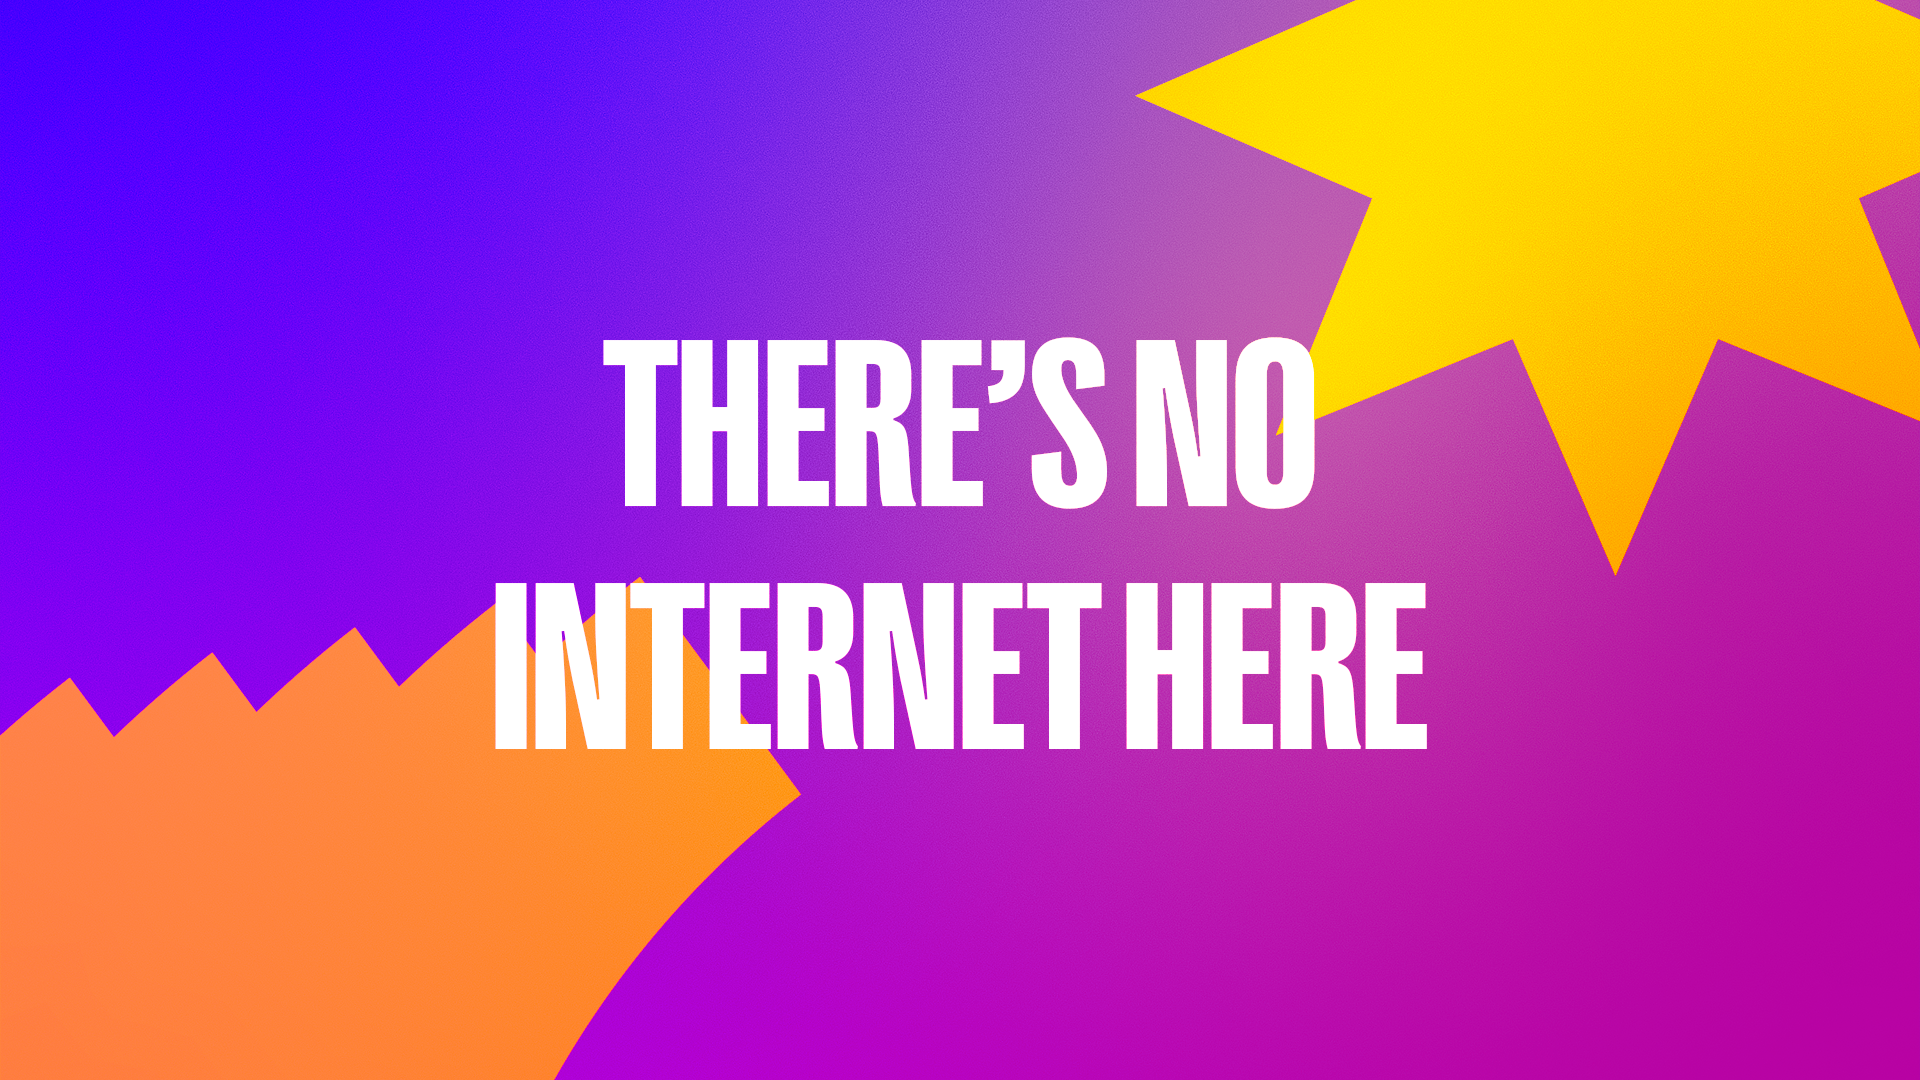 There’s no internet here